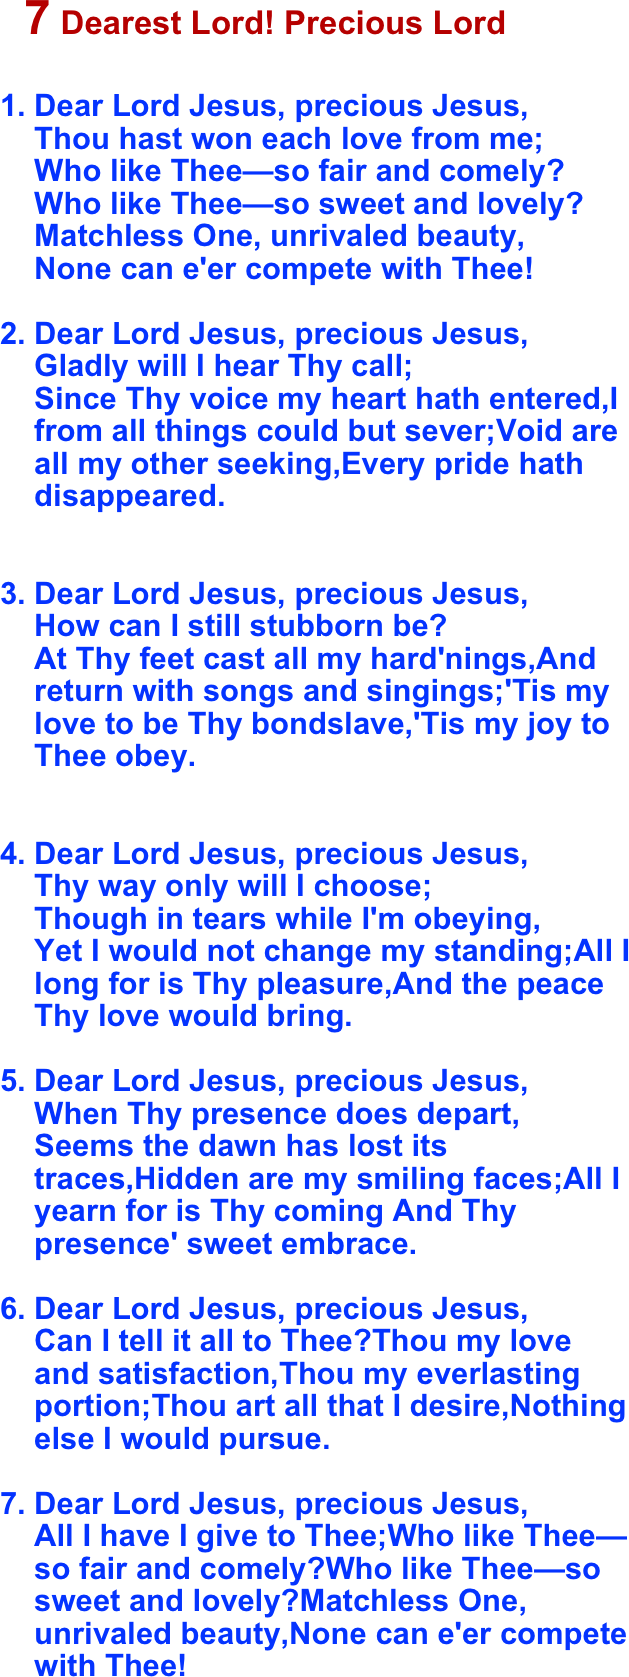 
  ￼

Dear Lord Jesus, precious Jesus, Thou hast won each love from me; Who like Thee—so fair and comely? Who like Thee—so sweet and lovely? Matchless One, unrivaled beauty, None can e'er compete with Thee!Dear Lord Jesus, precious Jesus, Gladly will I hear Thy call; Since Thy voice my heart hath entered,I from all things could but sever;Void are all my other seeking,Every pride hath disappeared.
Dear Lord Jesus, precious Jesus, How can I still stubborn be? At Thy feet cast all my hard'nings,And return with songs and singings;'Tis my love to be Thy bondslave,'Tis my joy to Thee obey.
Dear Lord Jesus, precious Jesus, Thy way only will I choose; Though in tears while I'm obeying, Yet I would not change my standing;All I long for is Thy pleasure,And the peace Thy love would bring.Dear Lord Jesus, precious Jesus, When Thy presence does depart, Seems the dawn has lost its traces,Hidden are my smiling faces;All I yearn for is Thy coming And Thy presence' sweet embrace.Dear Lord Jesus, precious Jesus, Can I tell it all to Thee?Thou my love and satisfaction,Thou my everlasting portion;Thou art all that I desire,Nothing else I would pursue.Dear Lord Jesus, precious Jesus, All I have I give to Thee;Who like Thee—so fair and comely?Who like Thee—so sweet and lovely?Matchless One, unrivaled beauty,None can e'er compete with Thee!
    
                                      